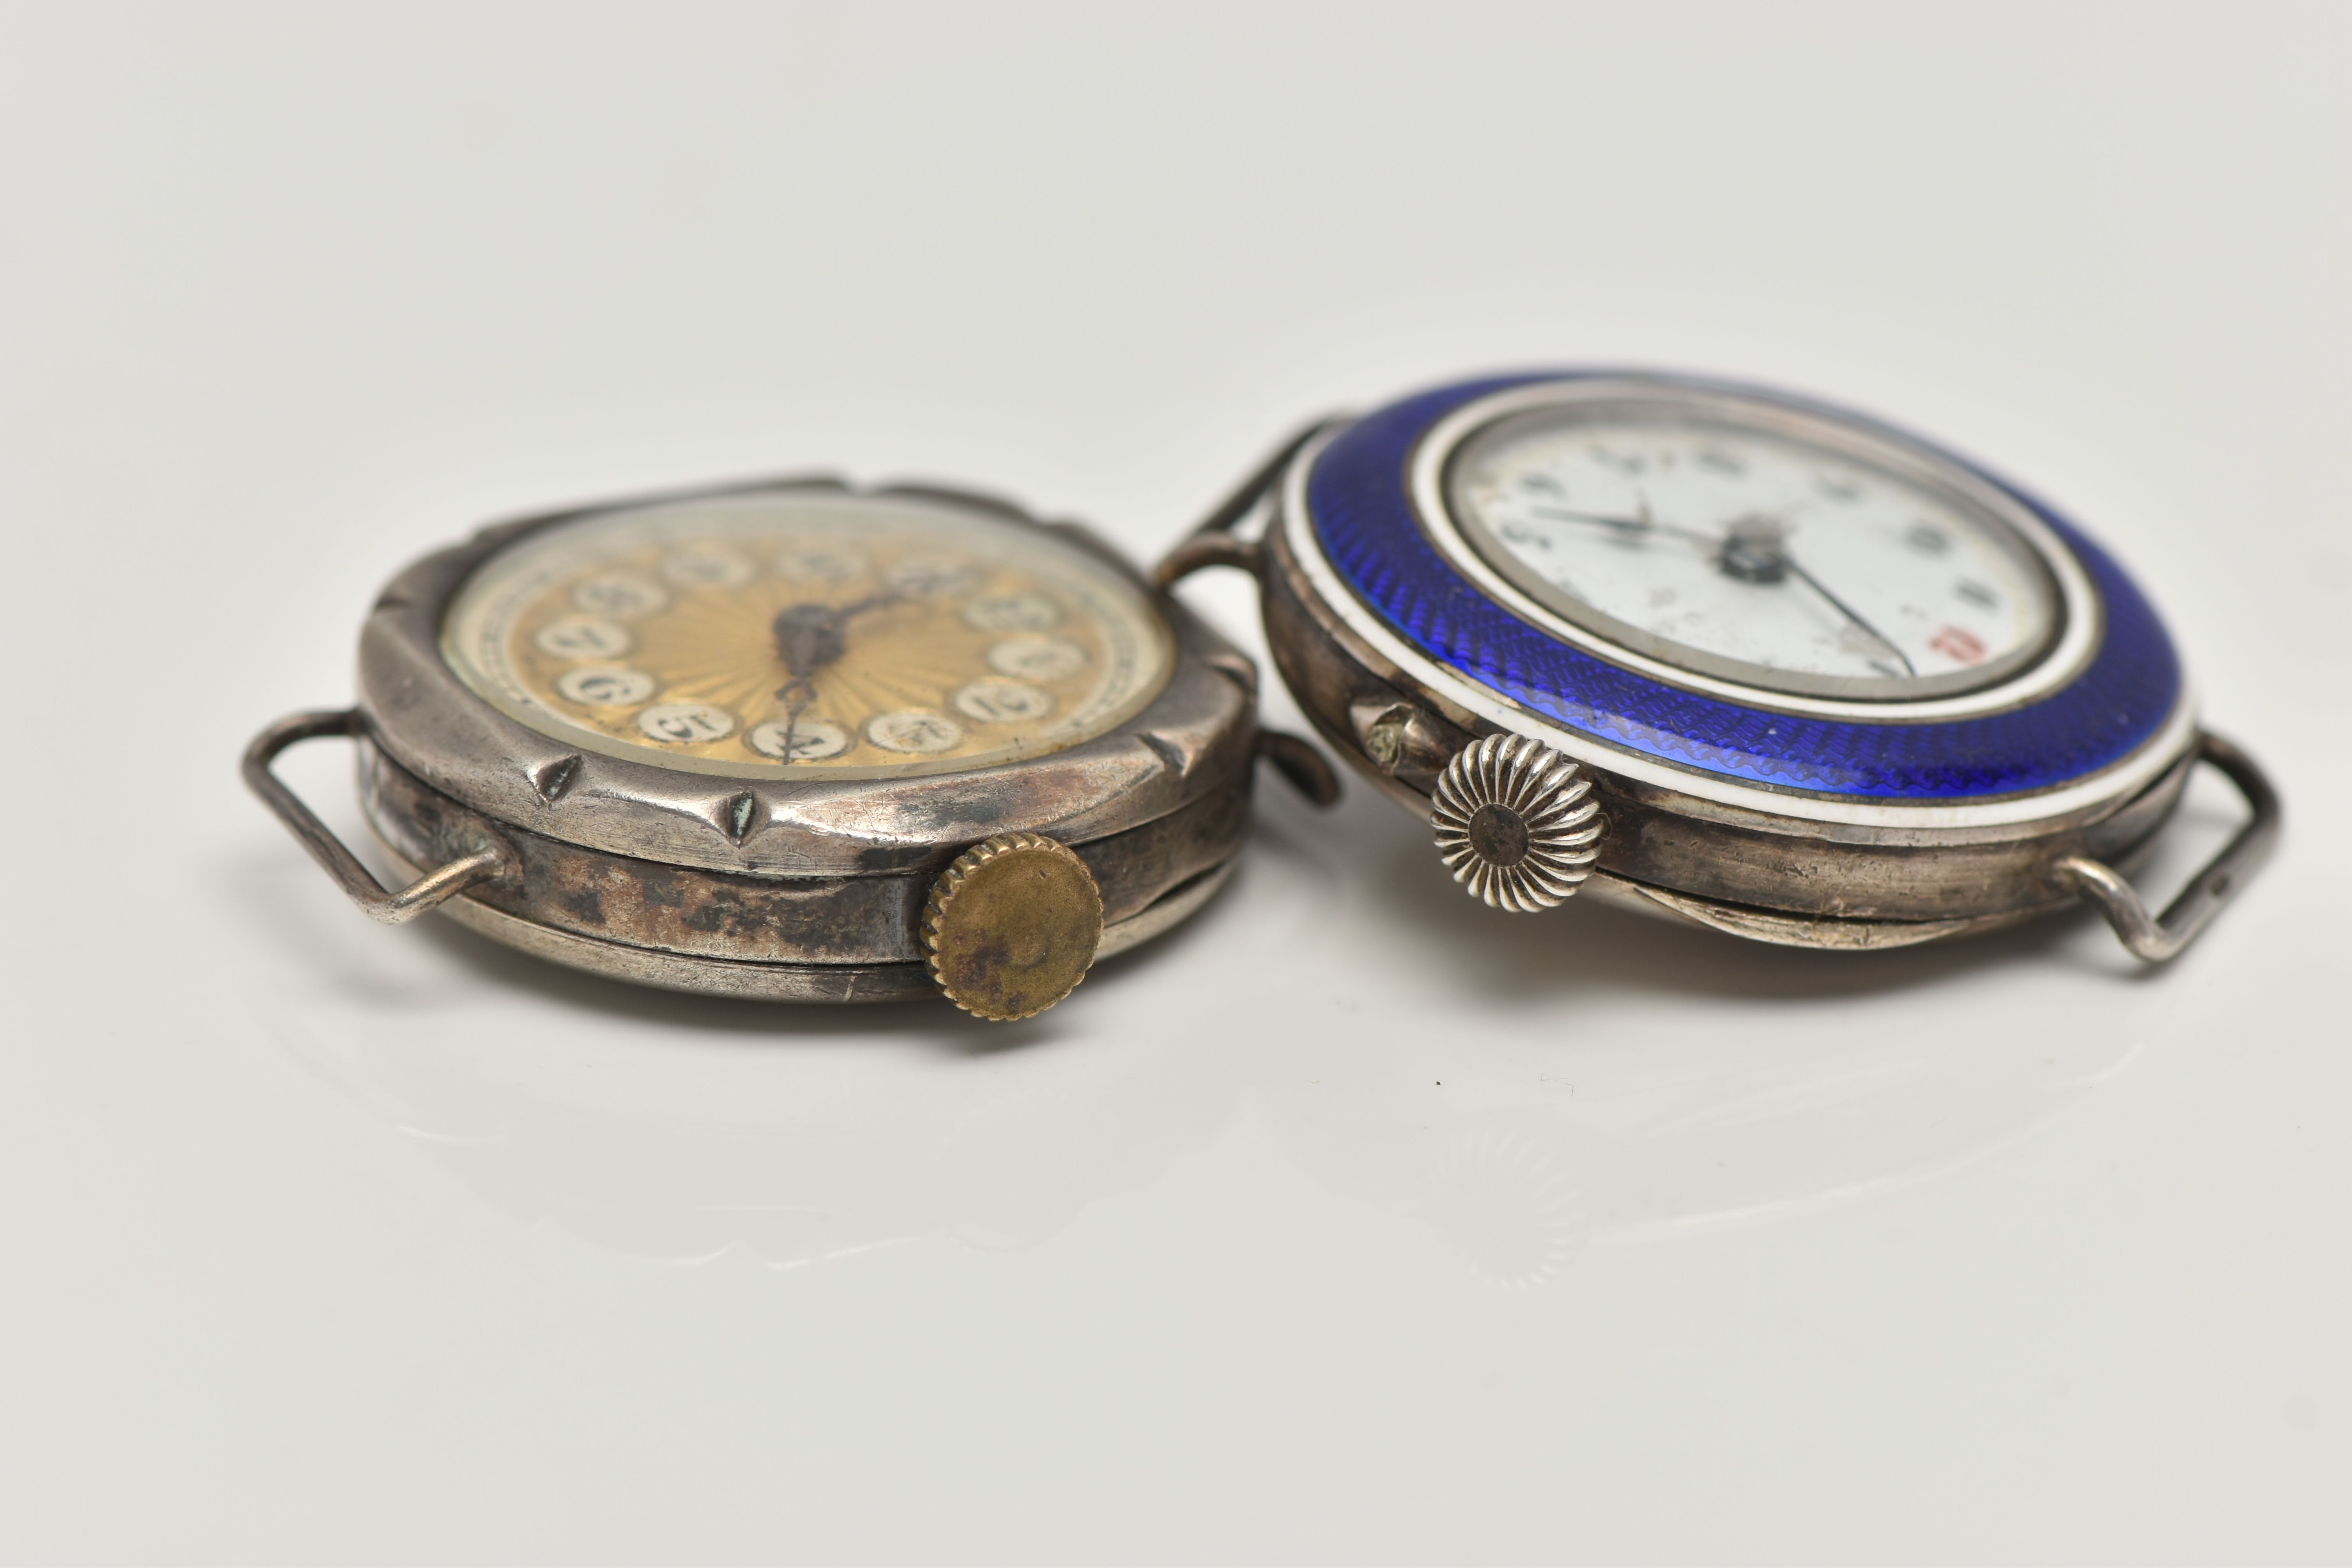 TWO EARLY 20TH CENTURY SILVER WATCH HEADS, the first with blue enamel detail, hallmarked London - Image 3 of 4